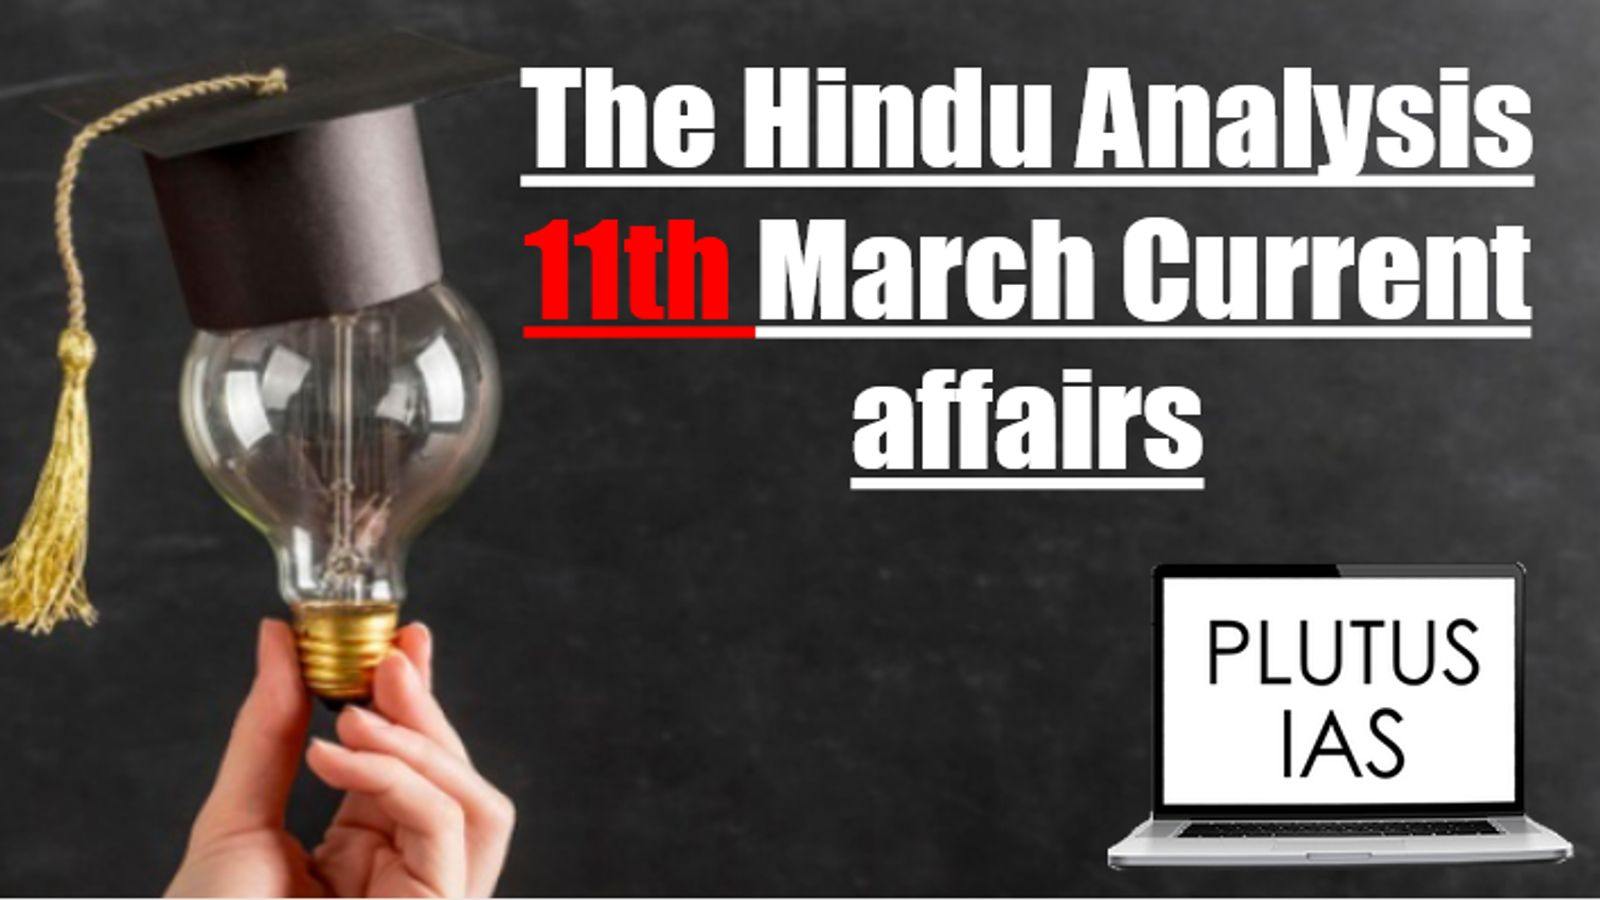 The Hindu Analysis 11th March Current Affairs